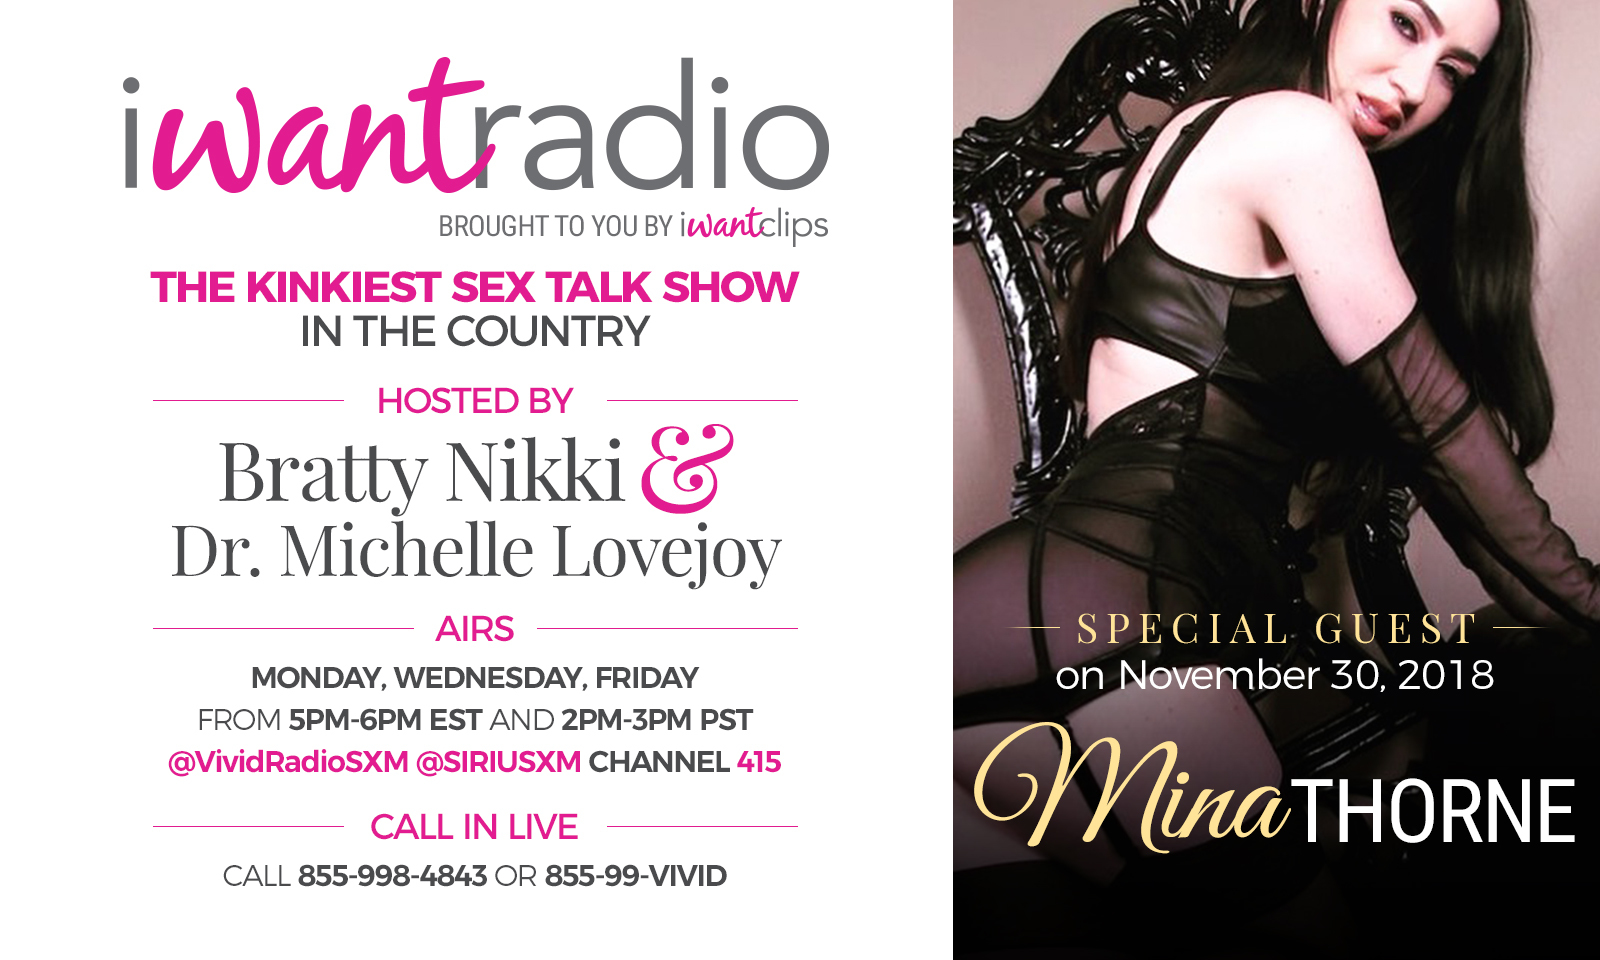 Domme Mina Thorne Guests On iWantRadio Today